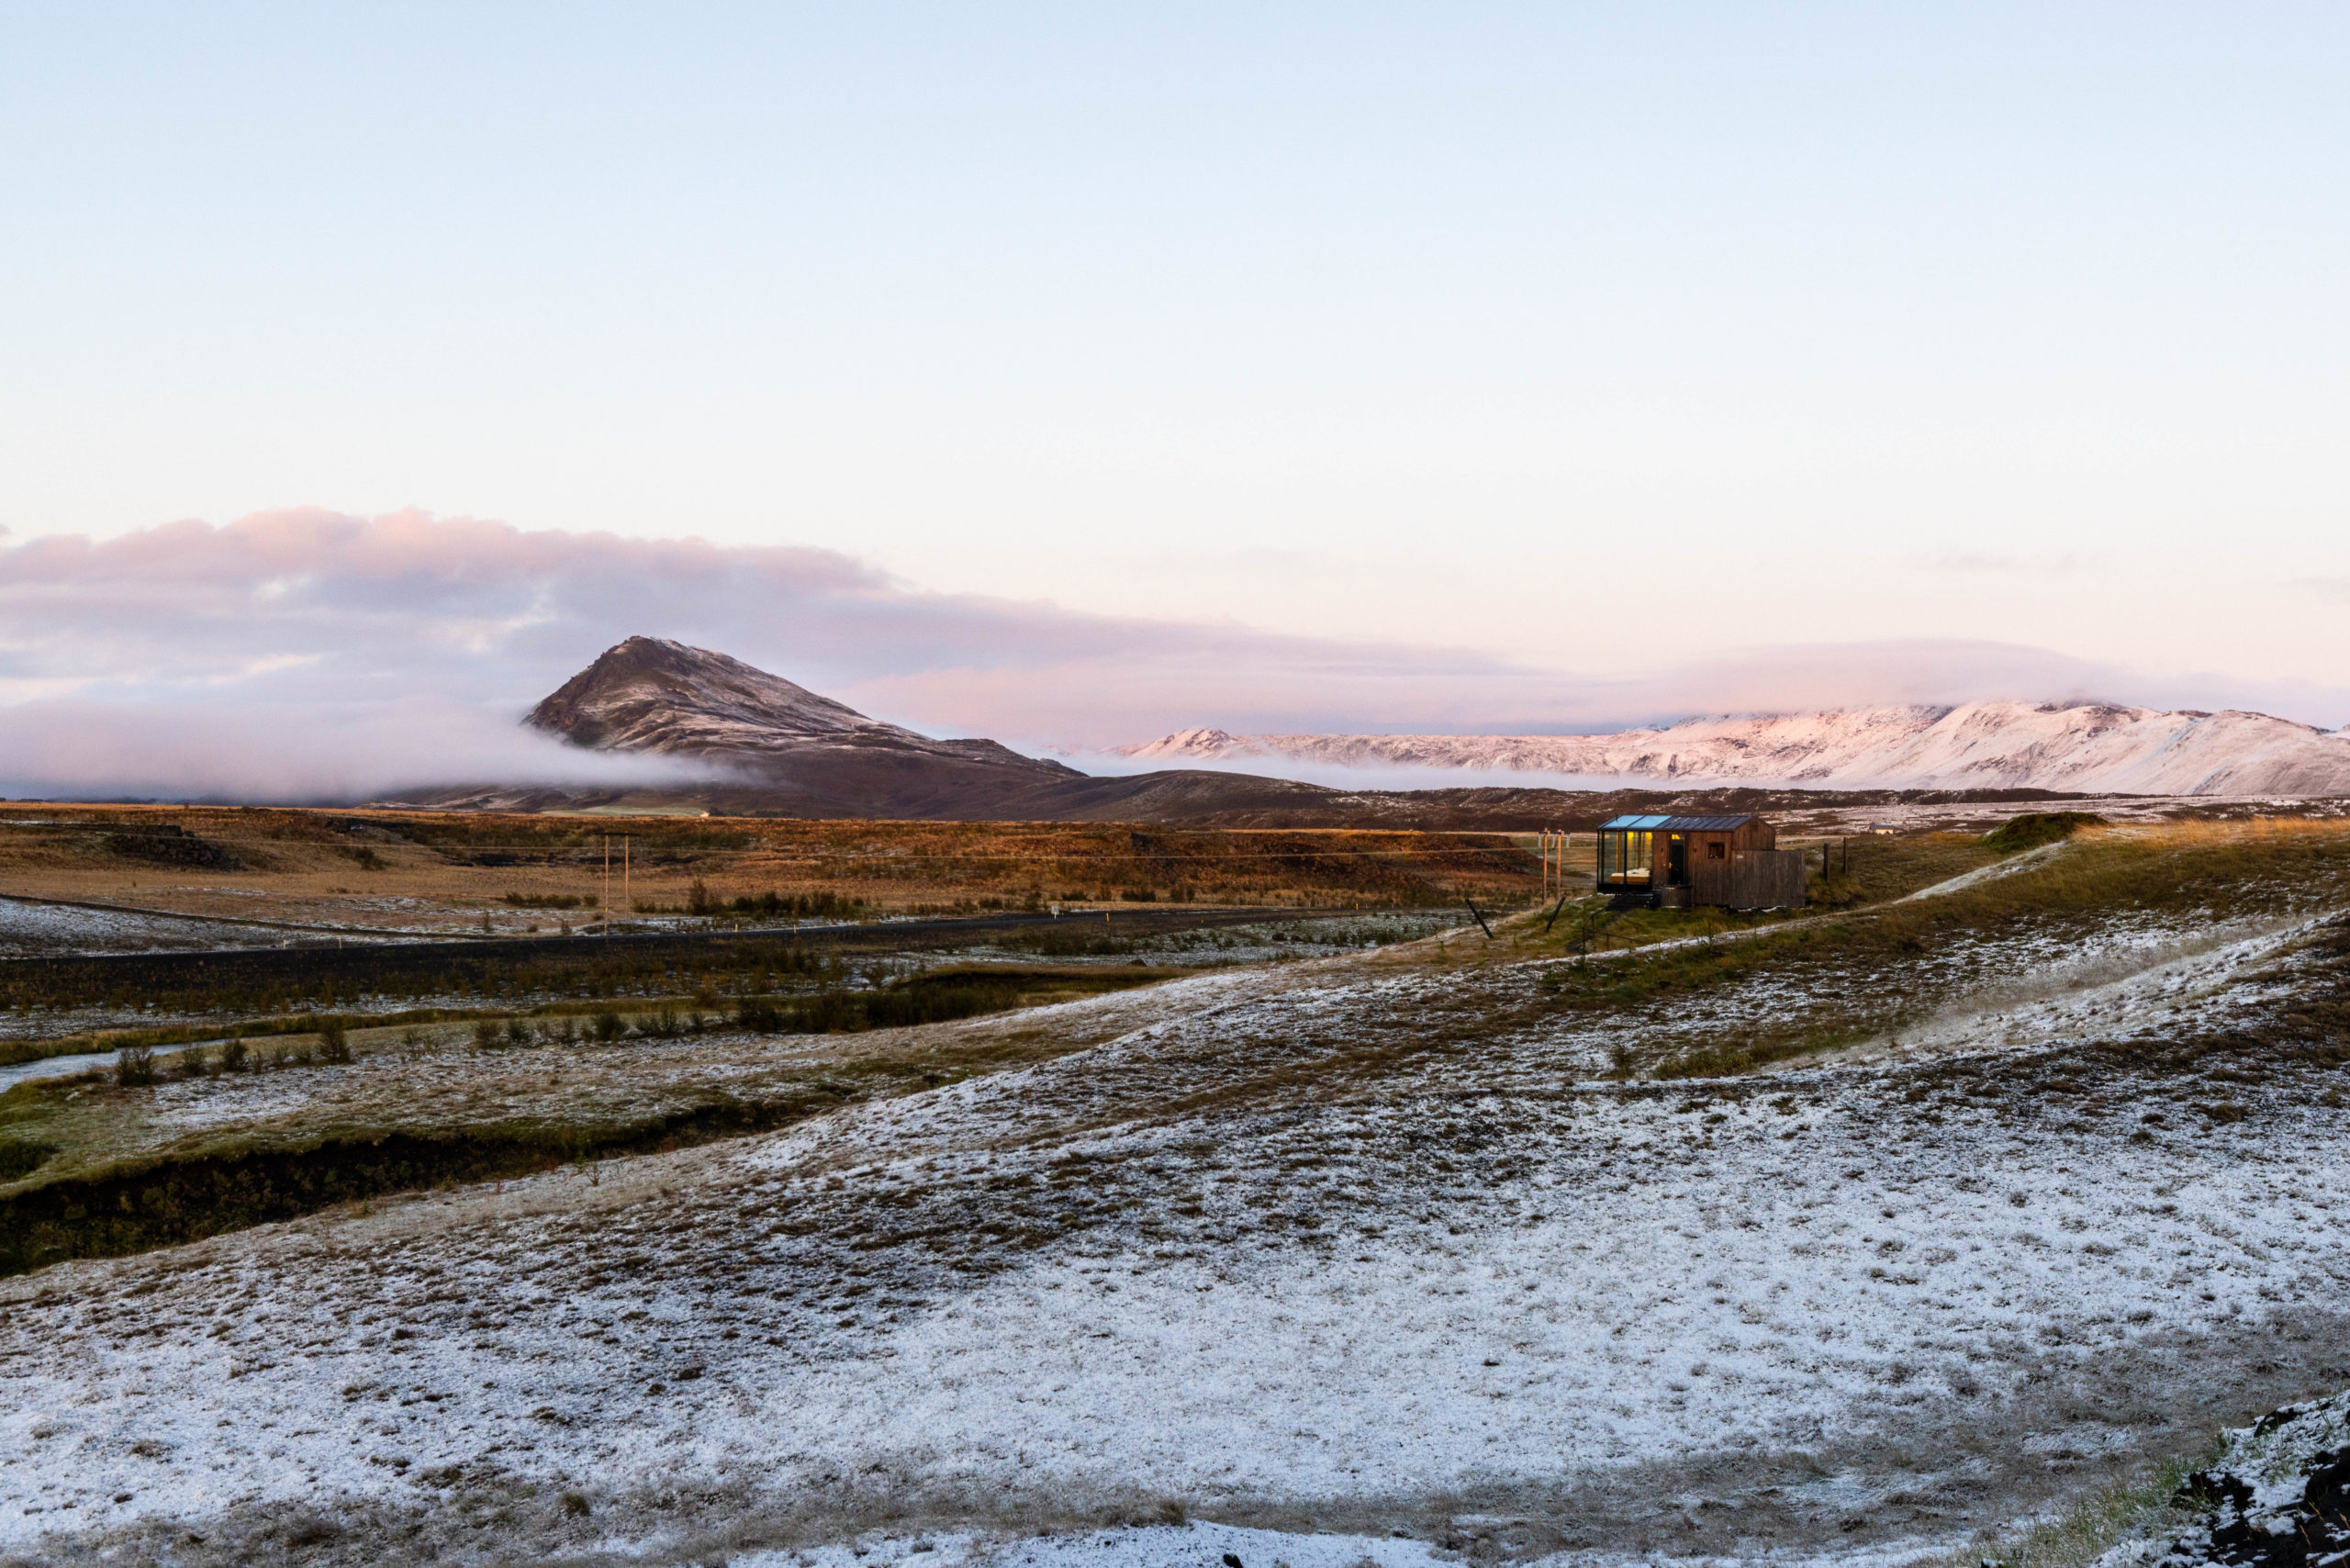 The views from the Panorama Glass Lodge in Iceland.